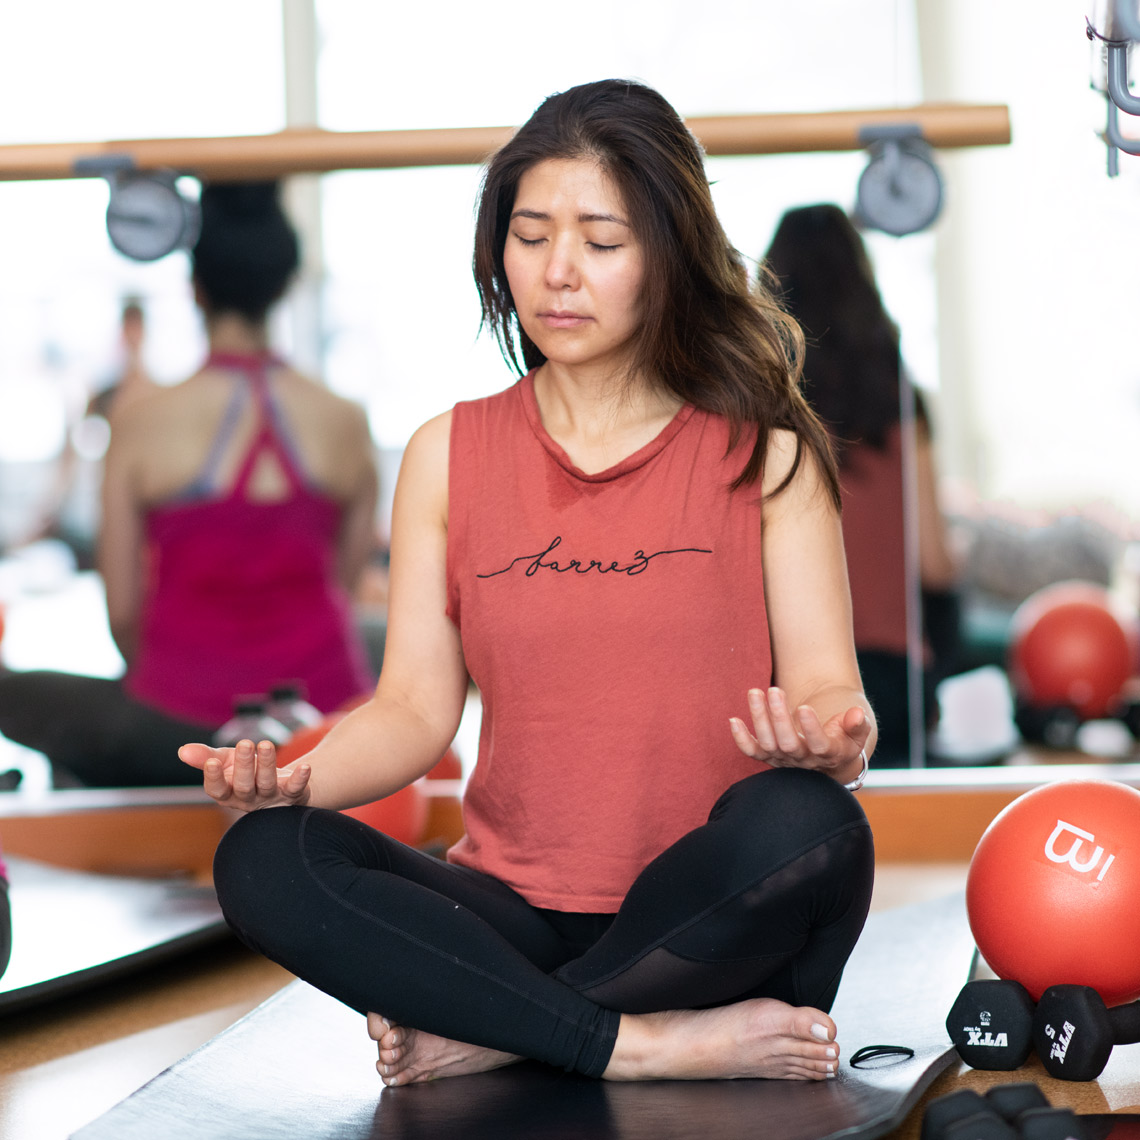 Commercial-Lifestyle-Barre3-Meditation